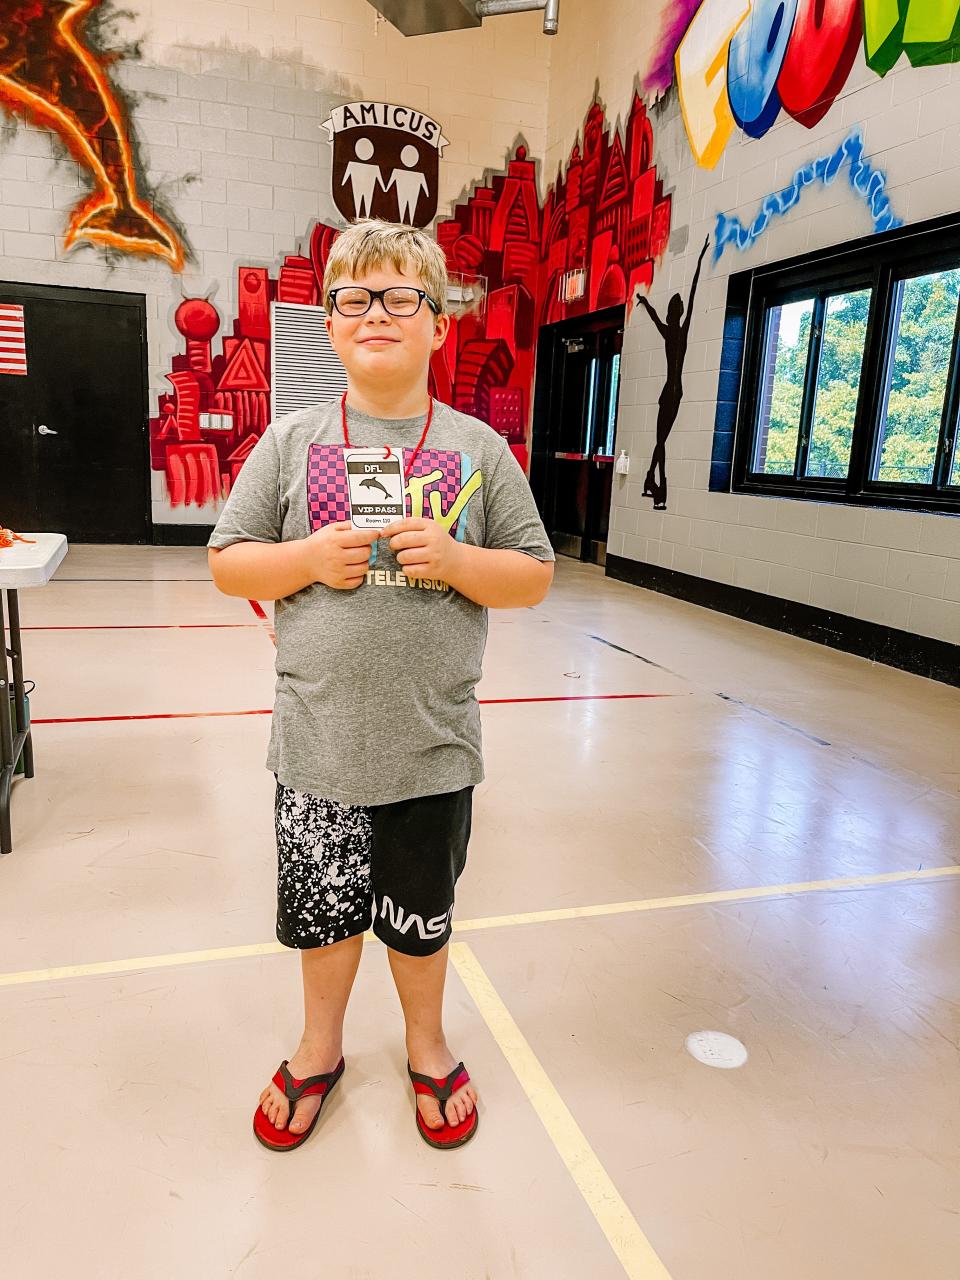 Maxton Ward receives his “VIP backstage pass” at Dogwood Elementary School’s Back to School Premiere event on Aug. 3, 2022.